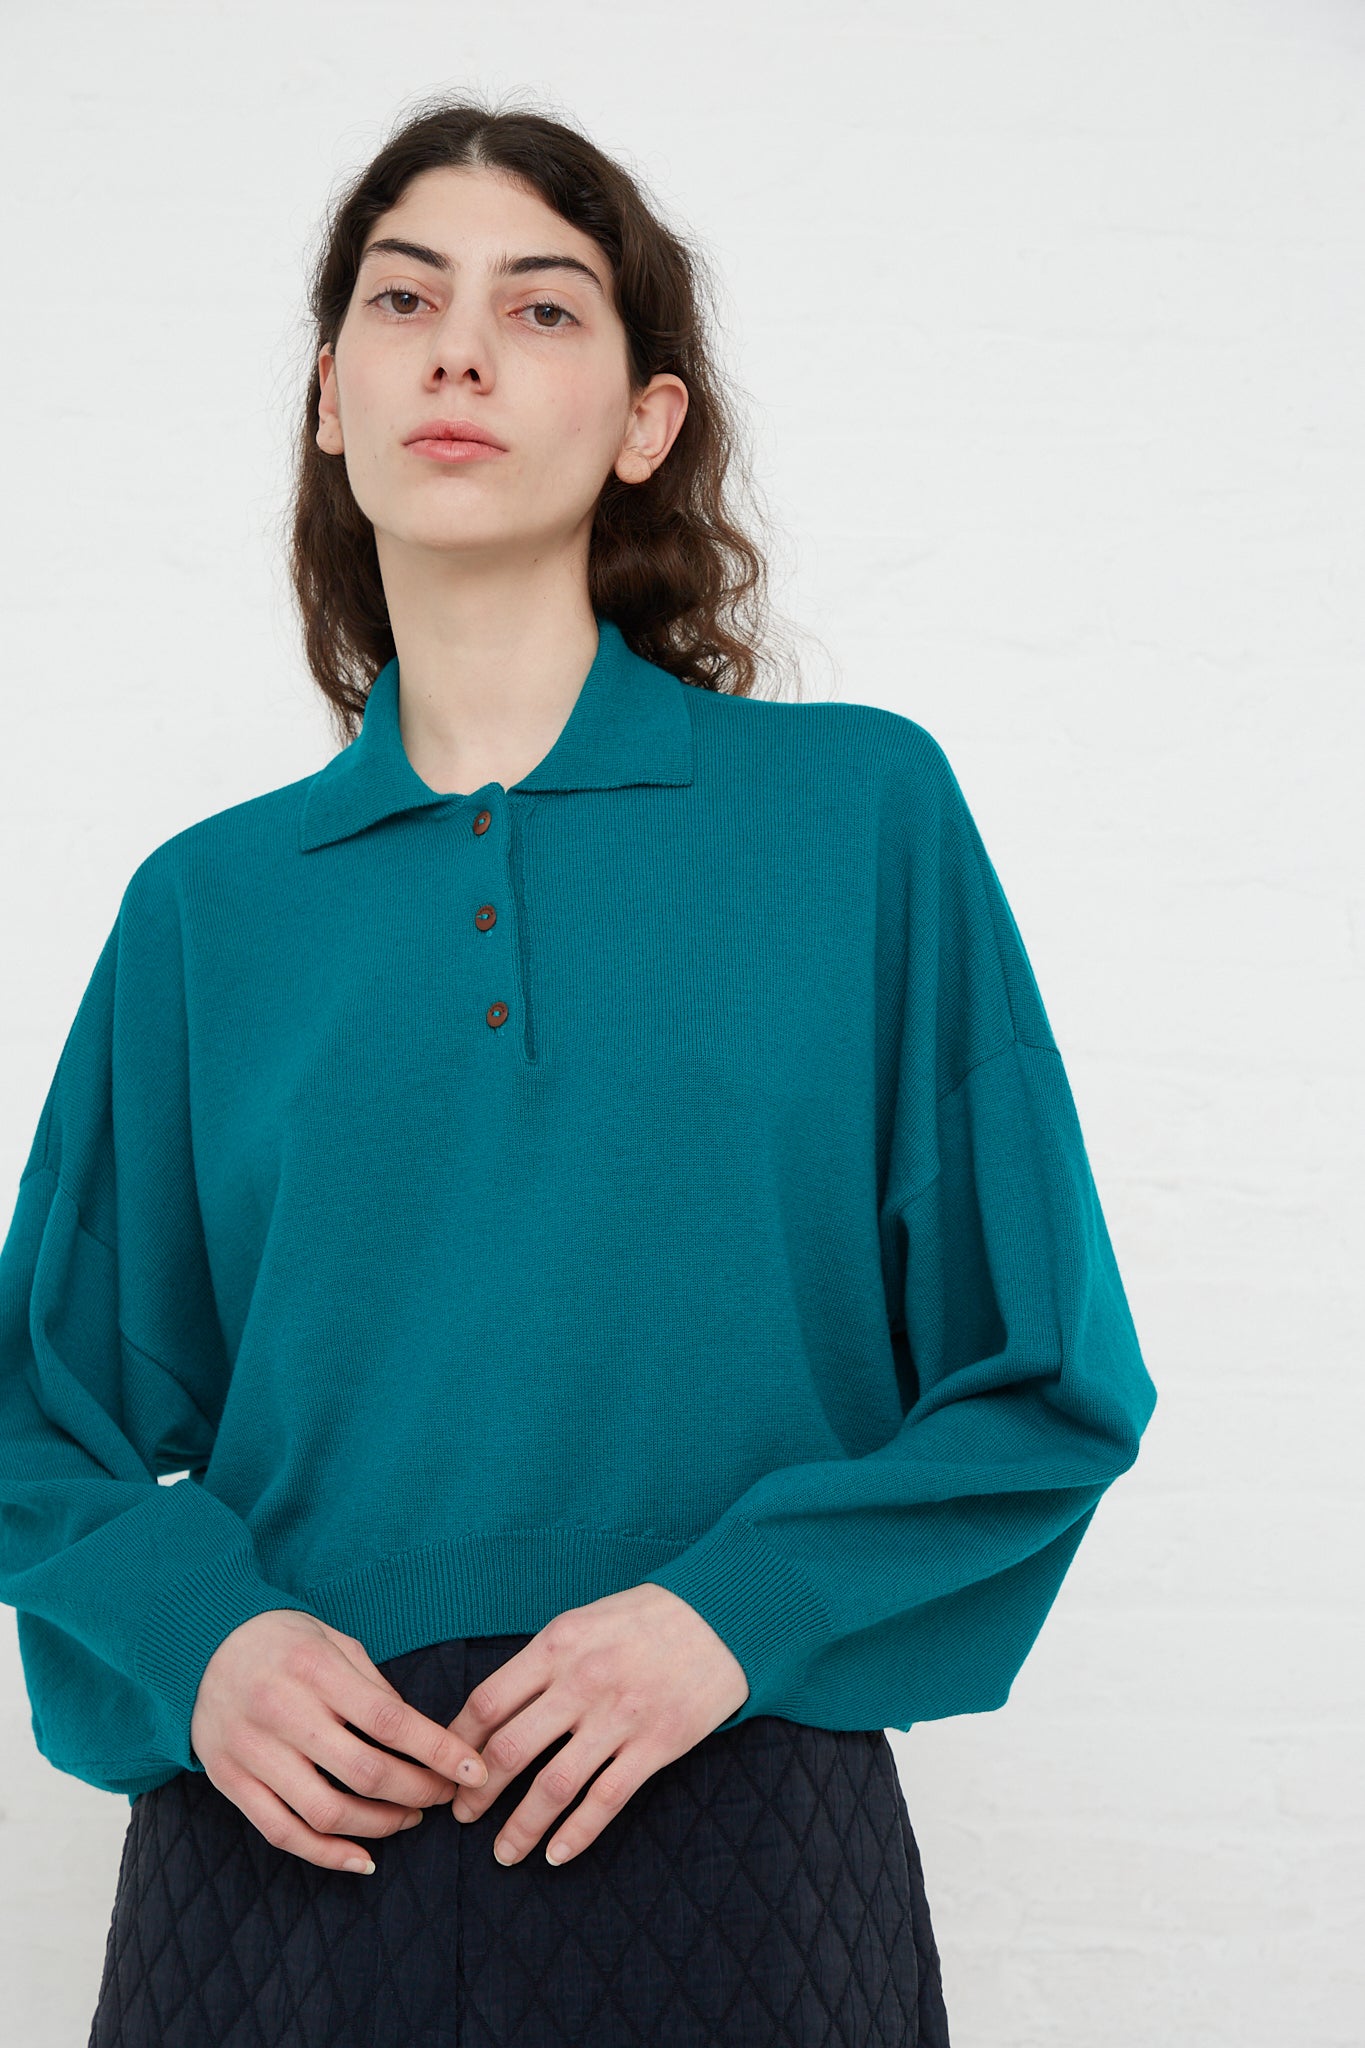 The model is wearing a Cordera Merino Wool Polo Sweater in Teal Green made in Spain.